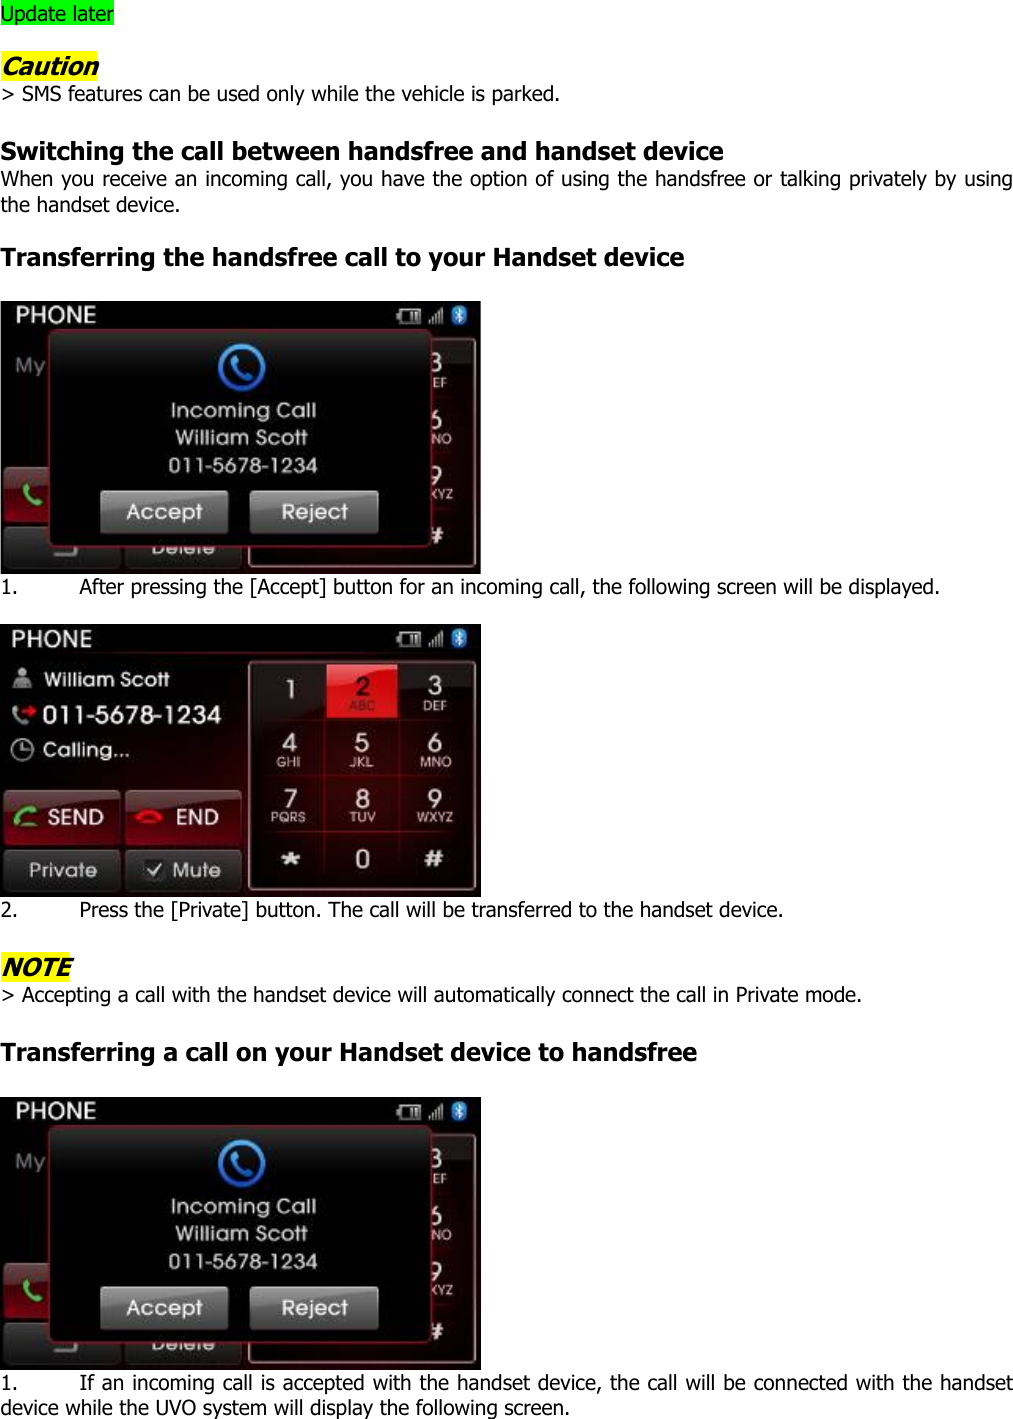 Update later  Caution &gt; SMS features can be used only while the vehicle is parked.    Switching the call between handsfree and handset device When you receive an incoming call, you have the option of using the handsfree or talking privately by using the handset device.    Transferring the handsfree call to your Handset device   1. After pressing the [Accept] button for an incoming call, the following screen will be displayed.   2. Press the [Private] button. The call will be transferred to the handset device.  NOTE &gt; Accepting a call with the handset device will automatically connect the call in Private mode.    Transferring a call on your Handset device to handsfree   1. If an incoming call is accepted with the handset device, the call will be connected with the handset device while the UVO system will display the following screen.   